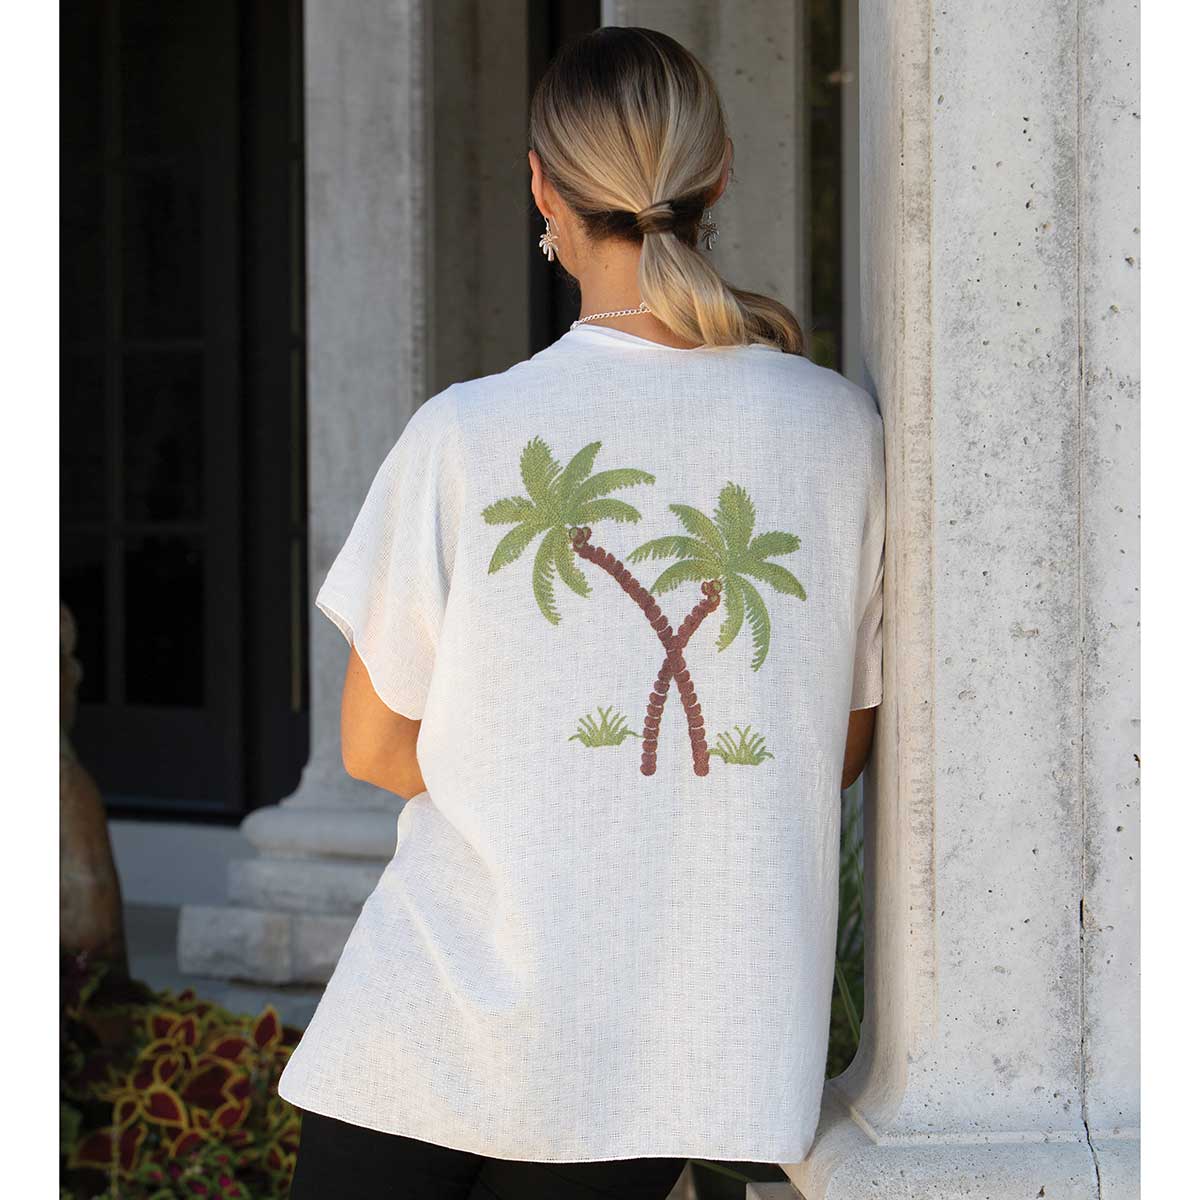 Vest Embroidered with Palm Tree 63"x29"